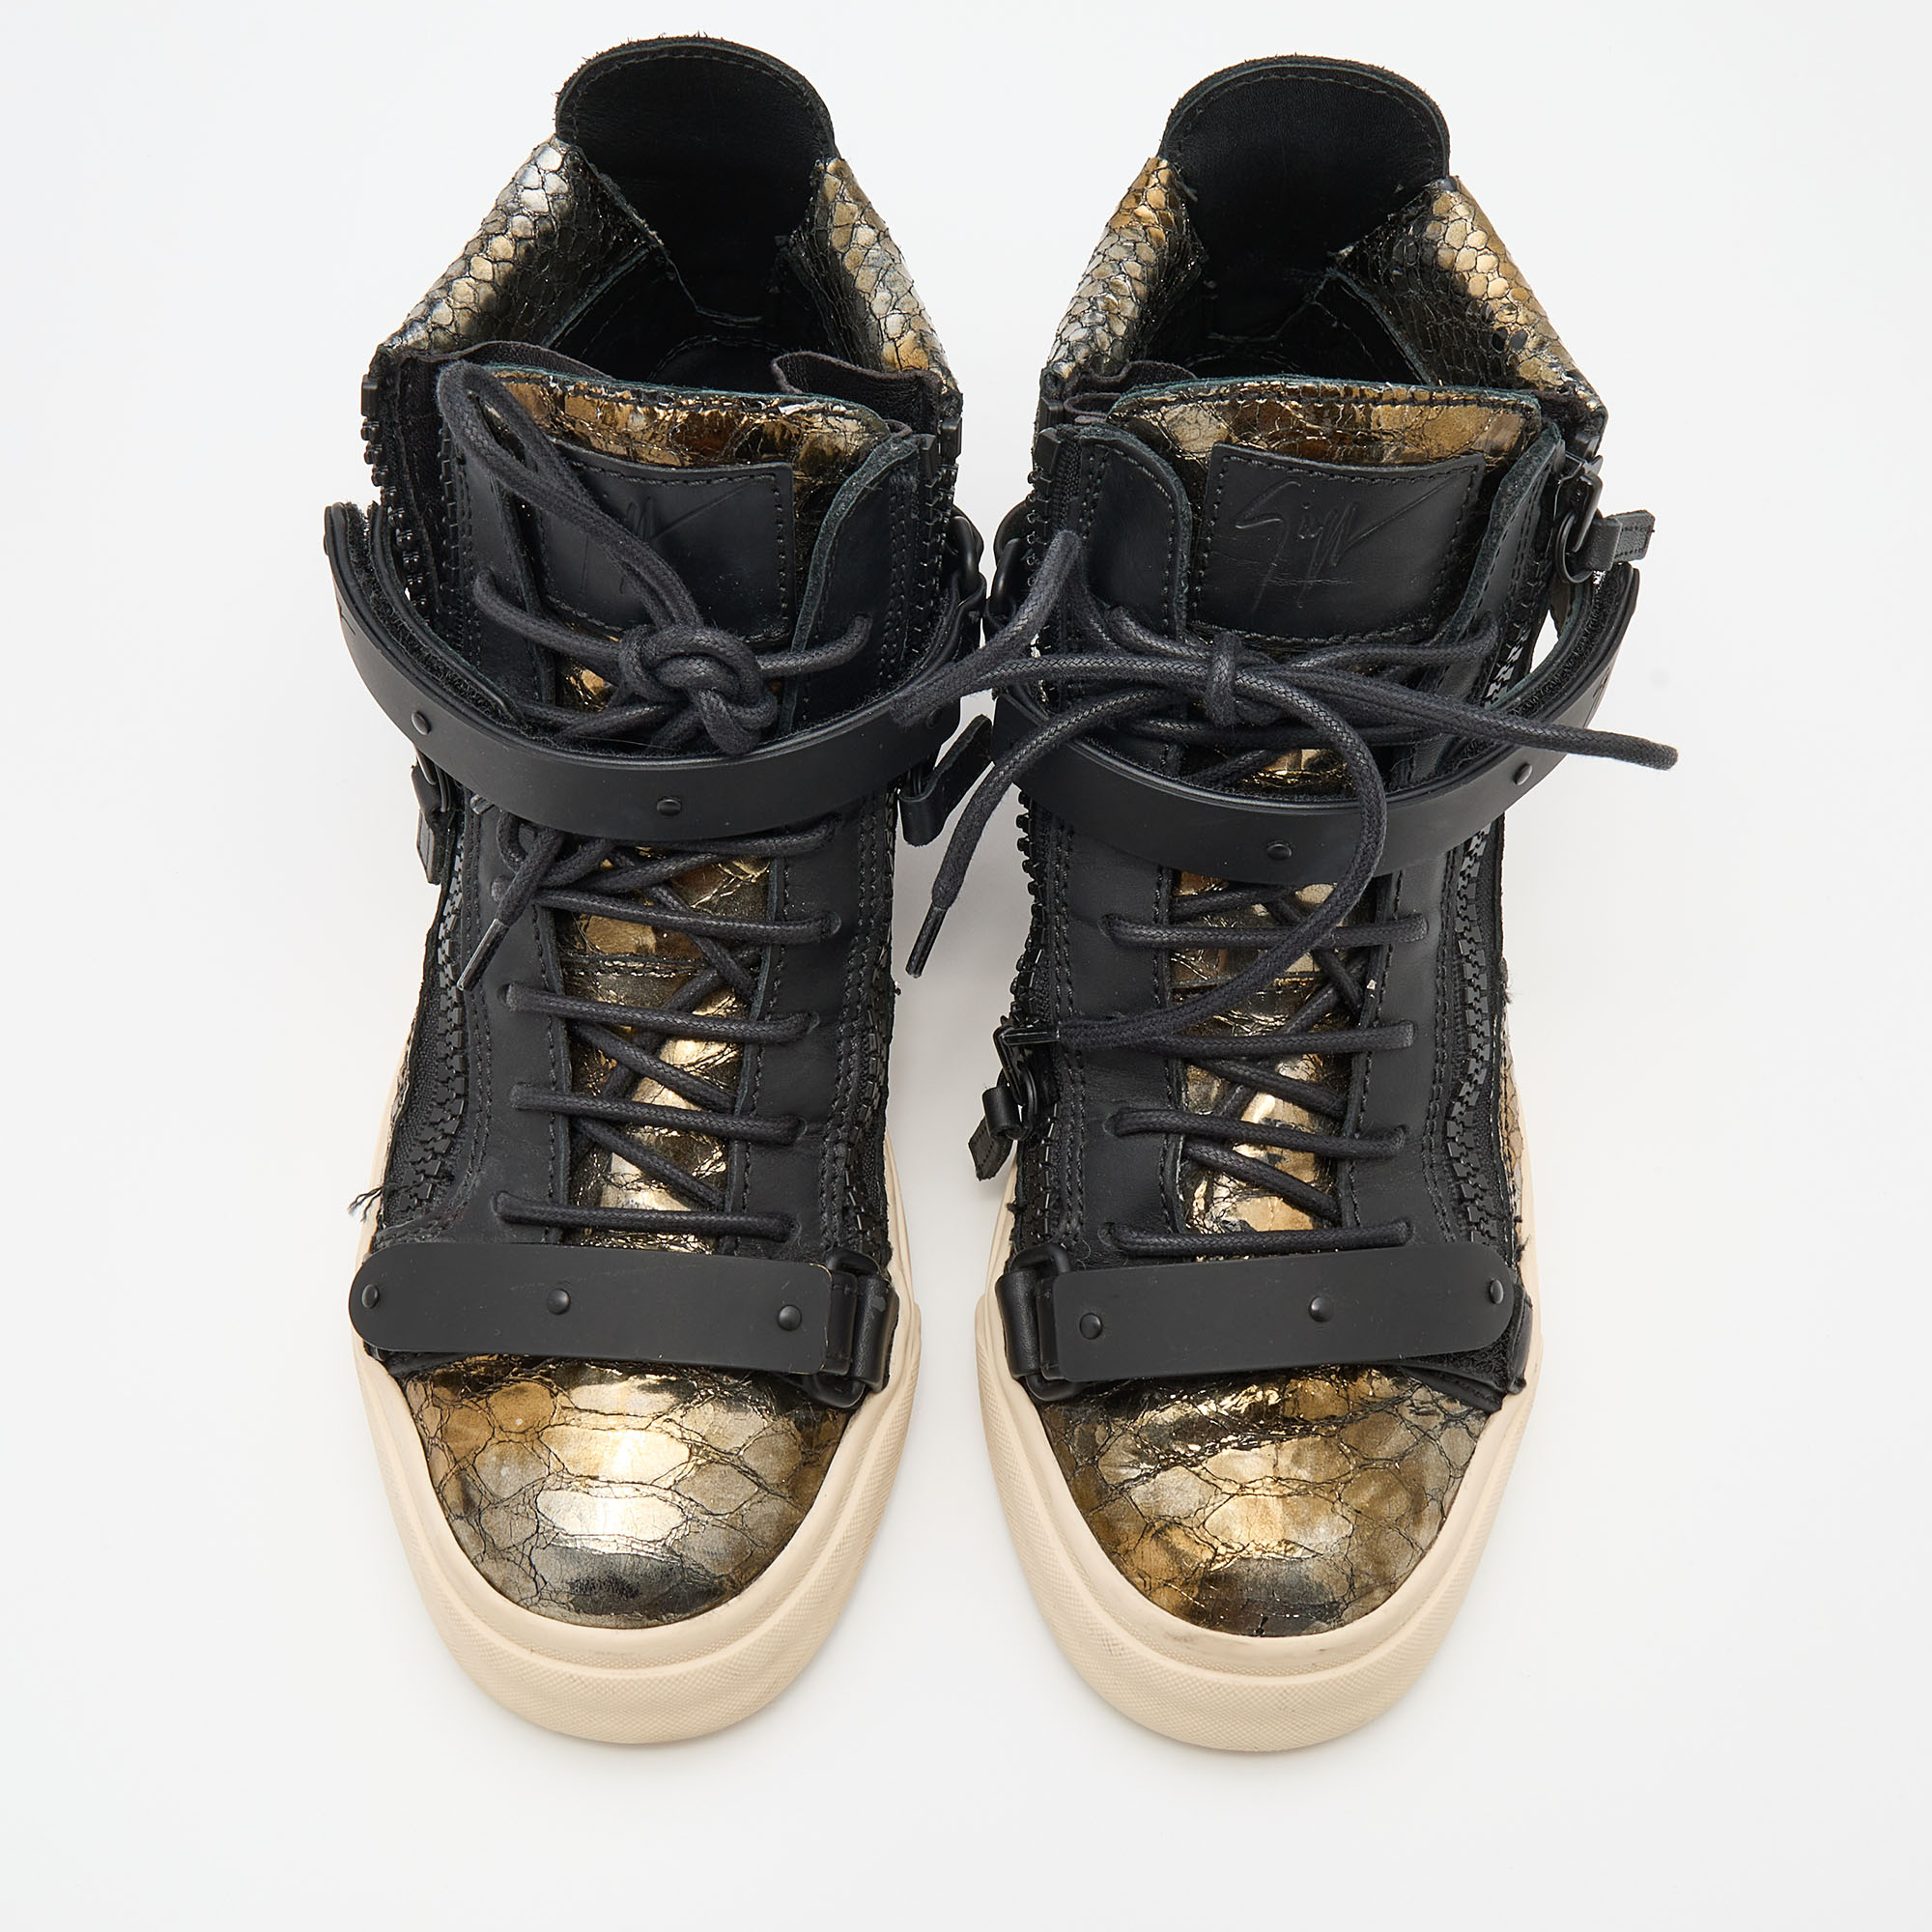 Giuseppe Zanotti Gold/Black Python Embossed Leather Coby High Top Sneakers Size 37